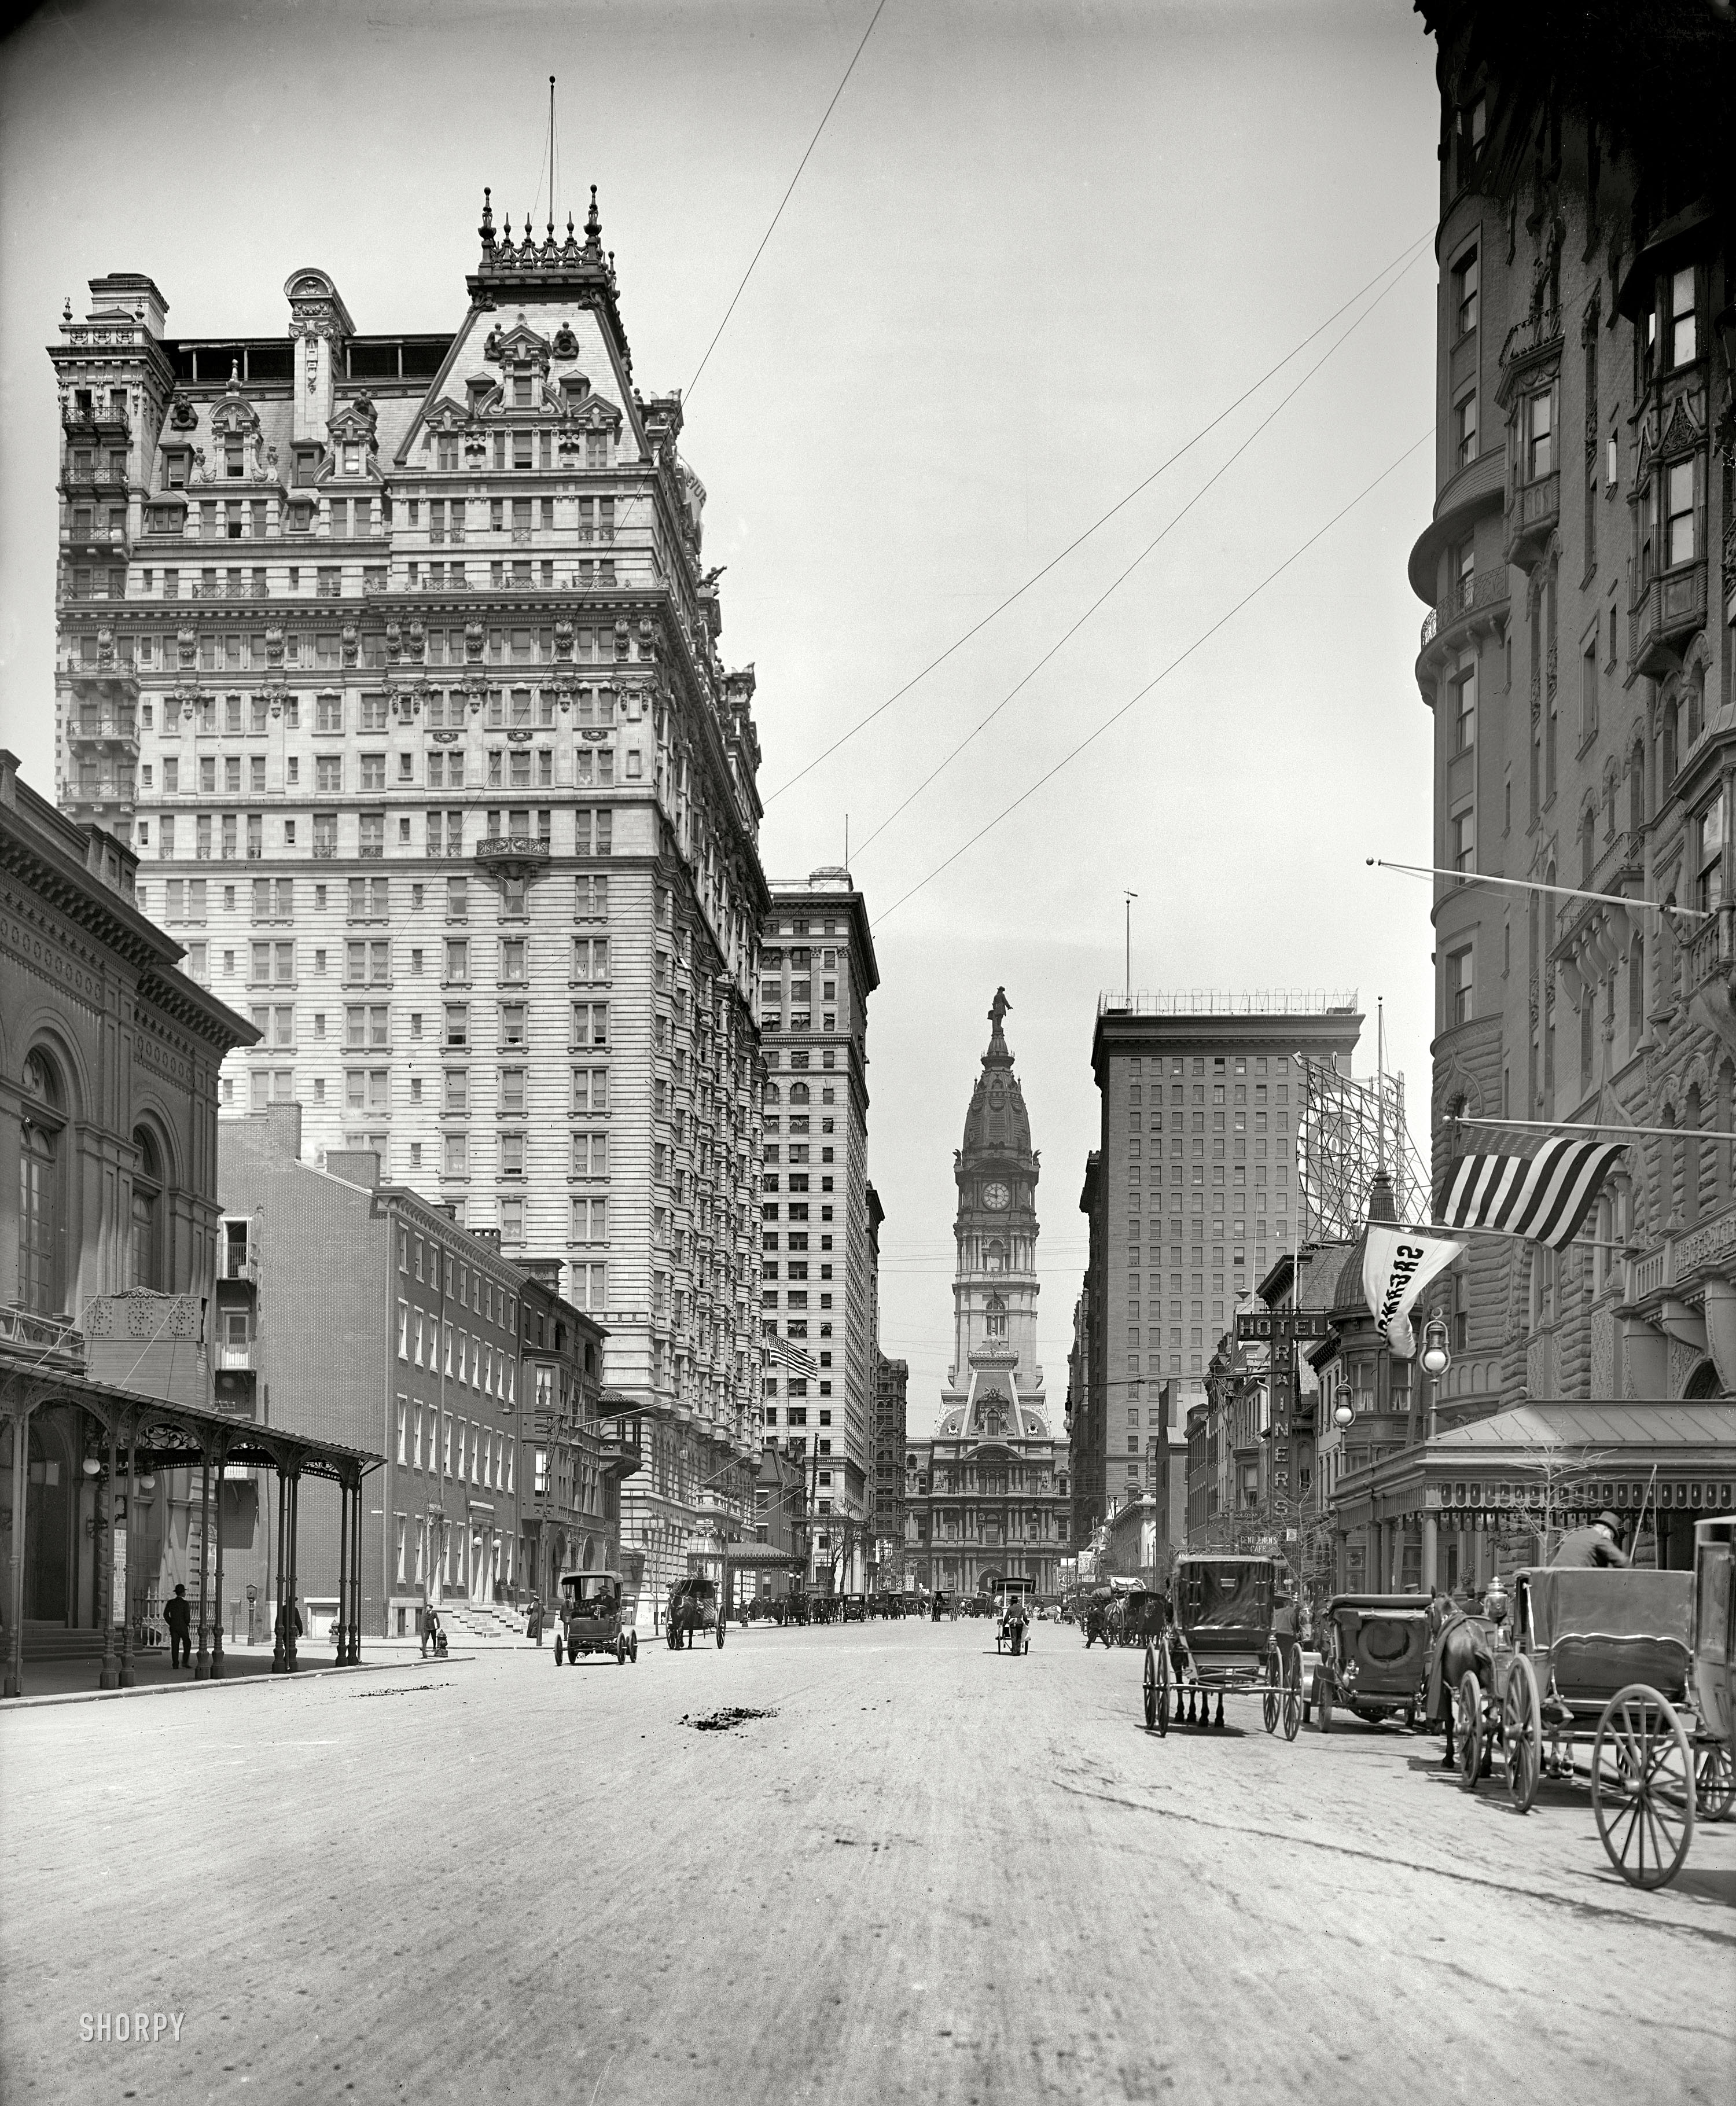 Philadelphia circa 1907. "City Hall, Broad Street north from Locust." 8x10 inch dry plate glass negative, Detroit Publishing Company. View full size.